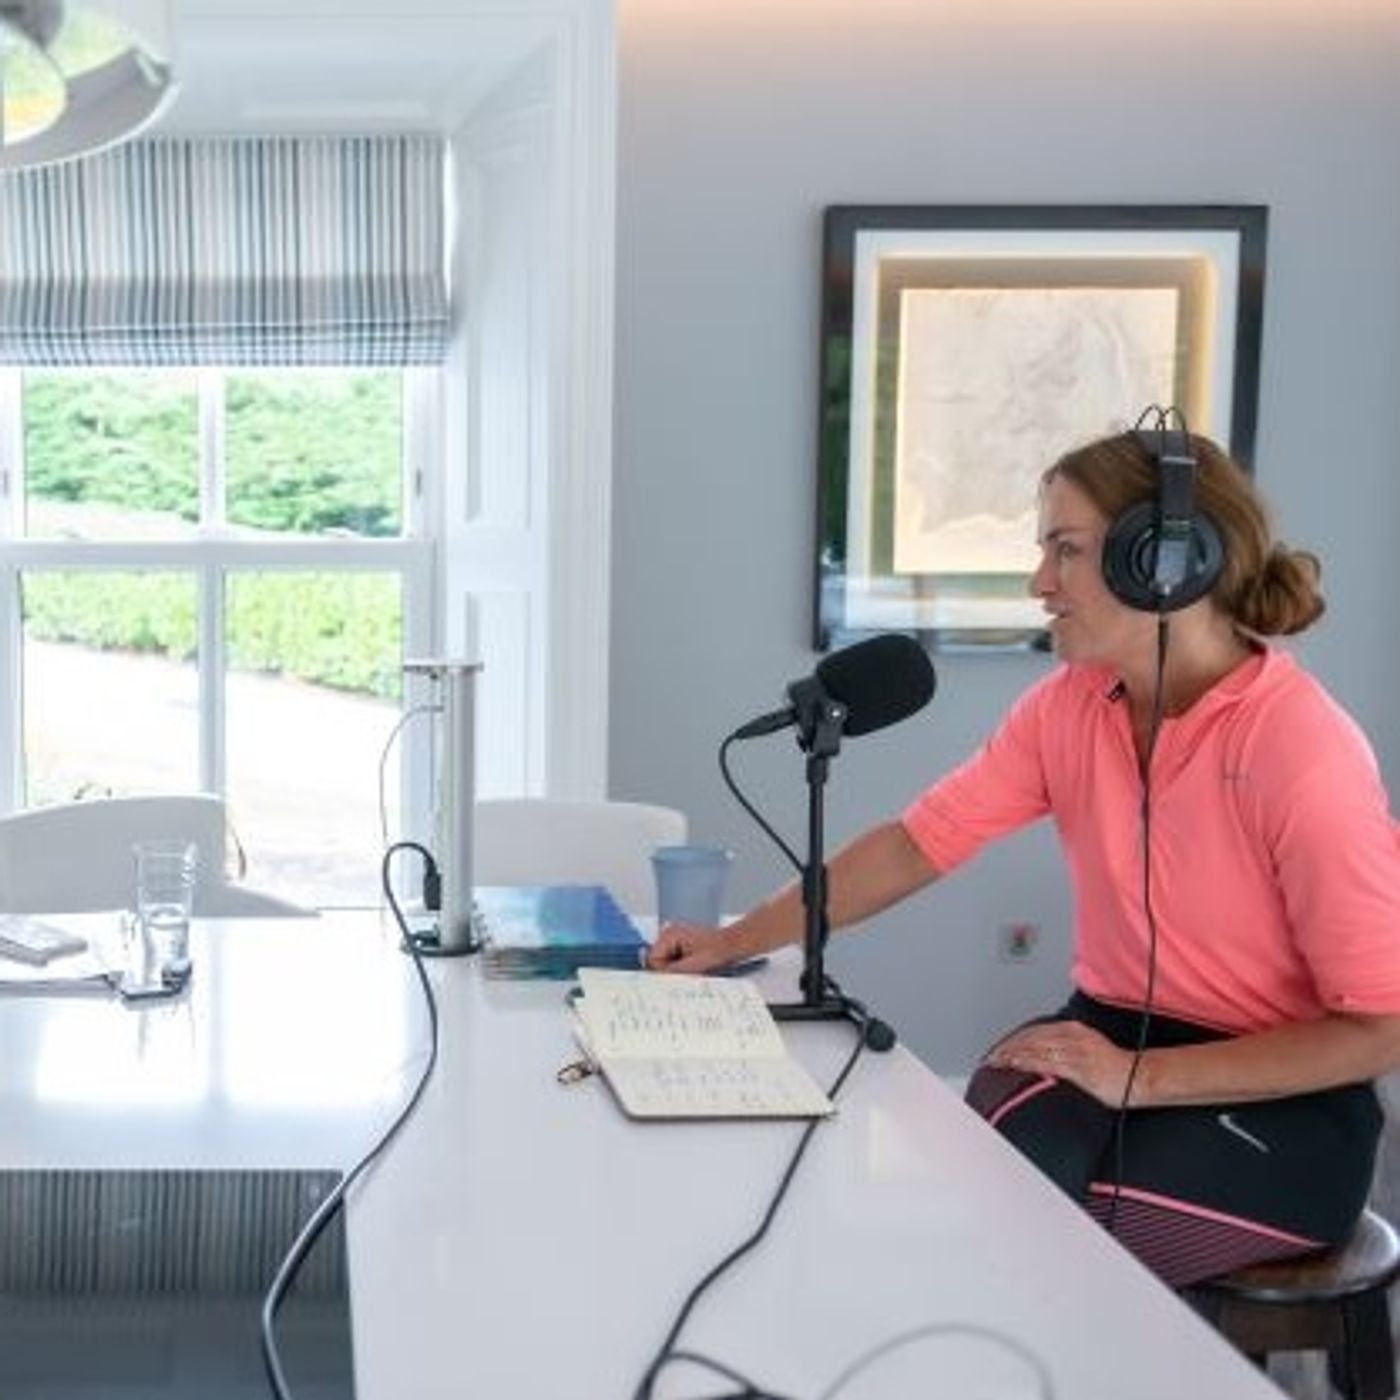 EPISODE 9: Louise has an insightful discussion with Dr Rhona Mahony